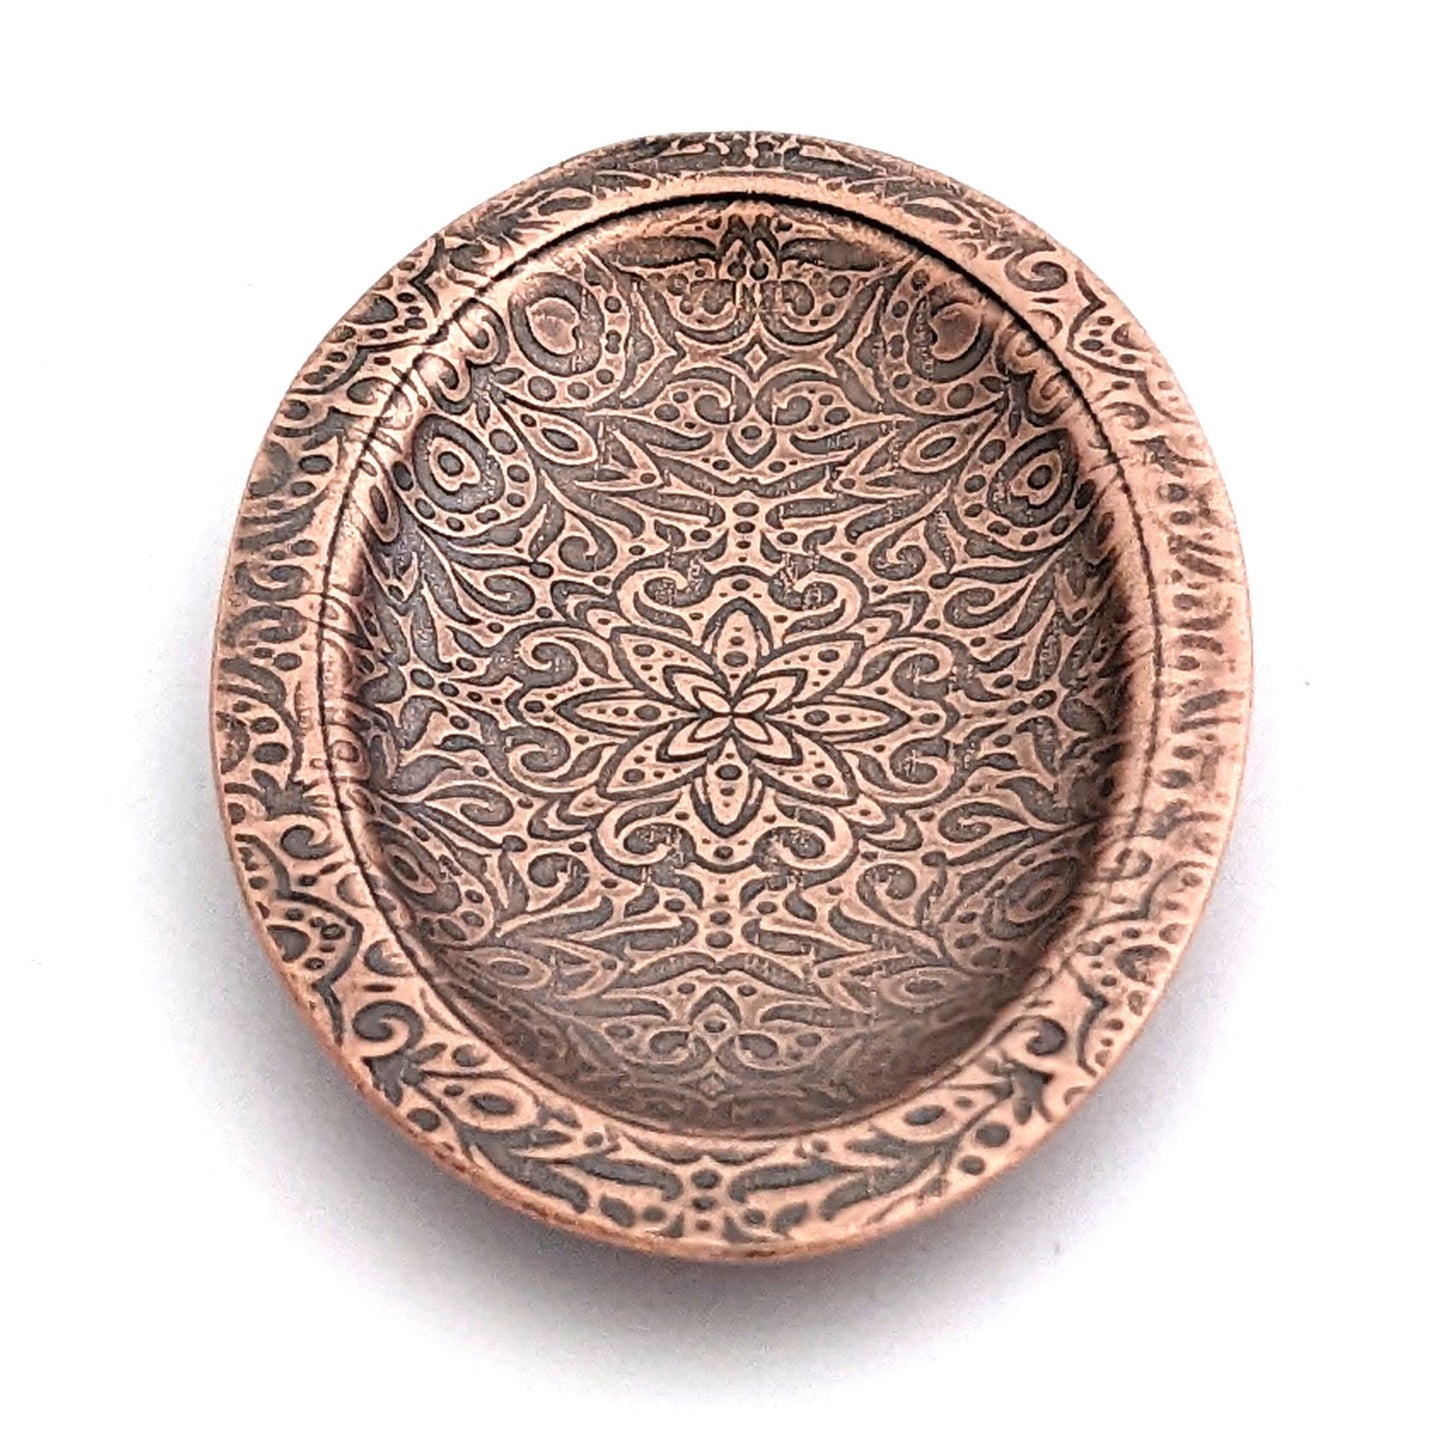 Copper oval ring dish with abstract garden flowers and leaves design.  Dish is 2 inches by three inches with a raised lip.